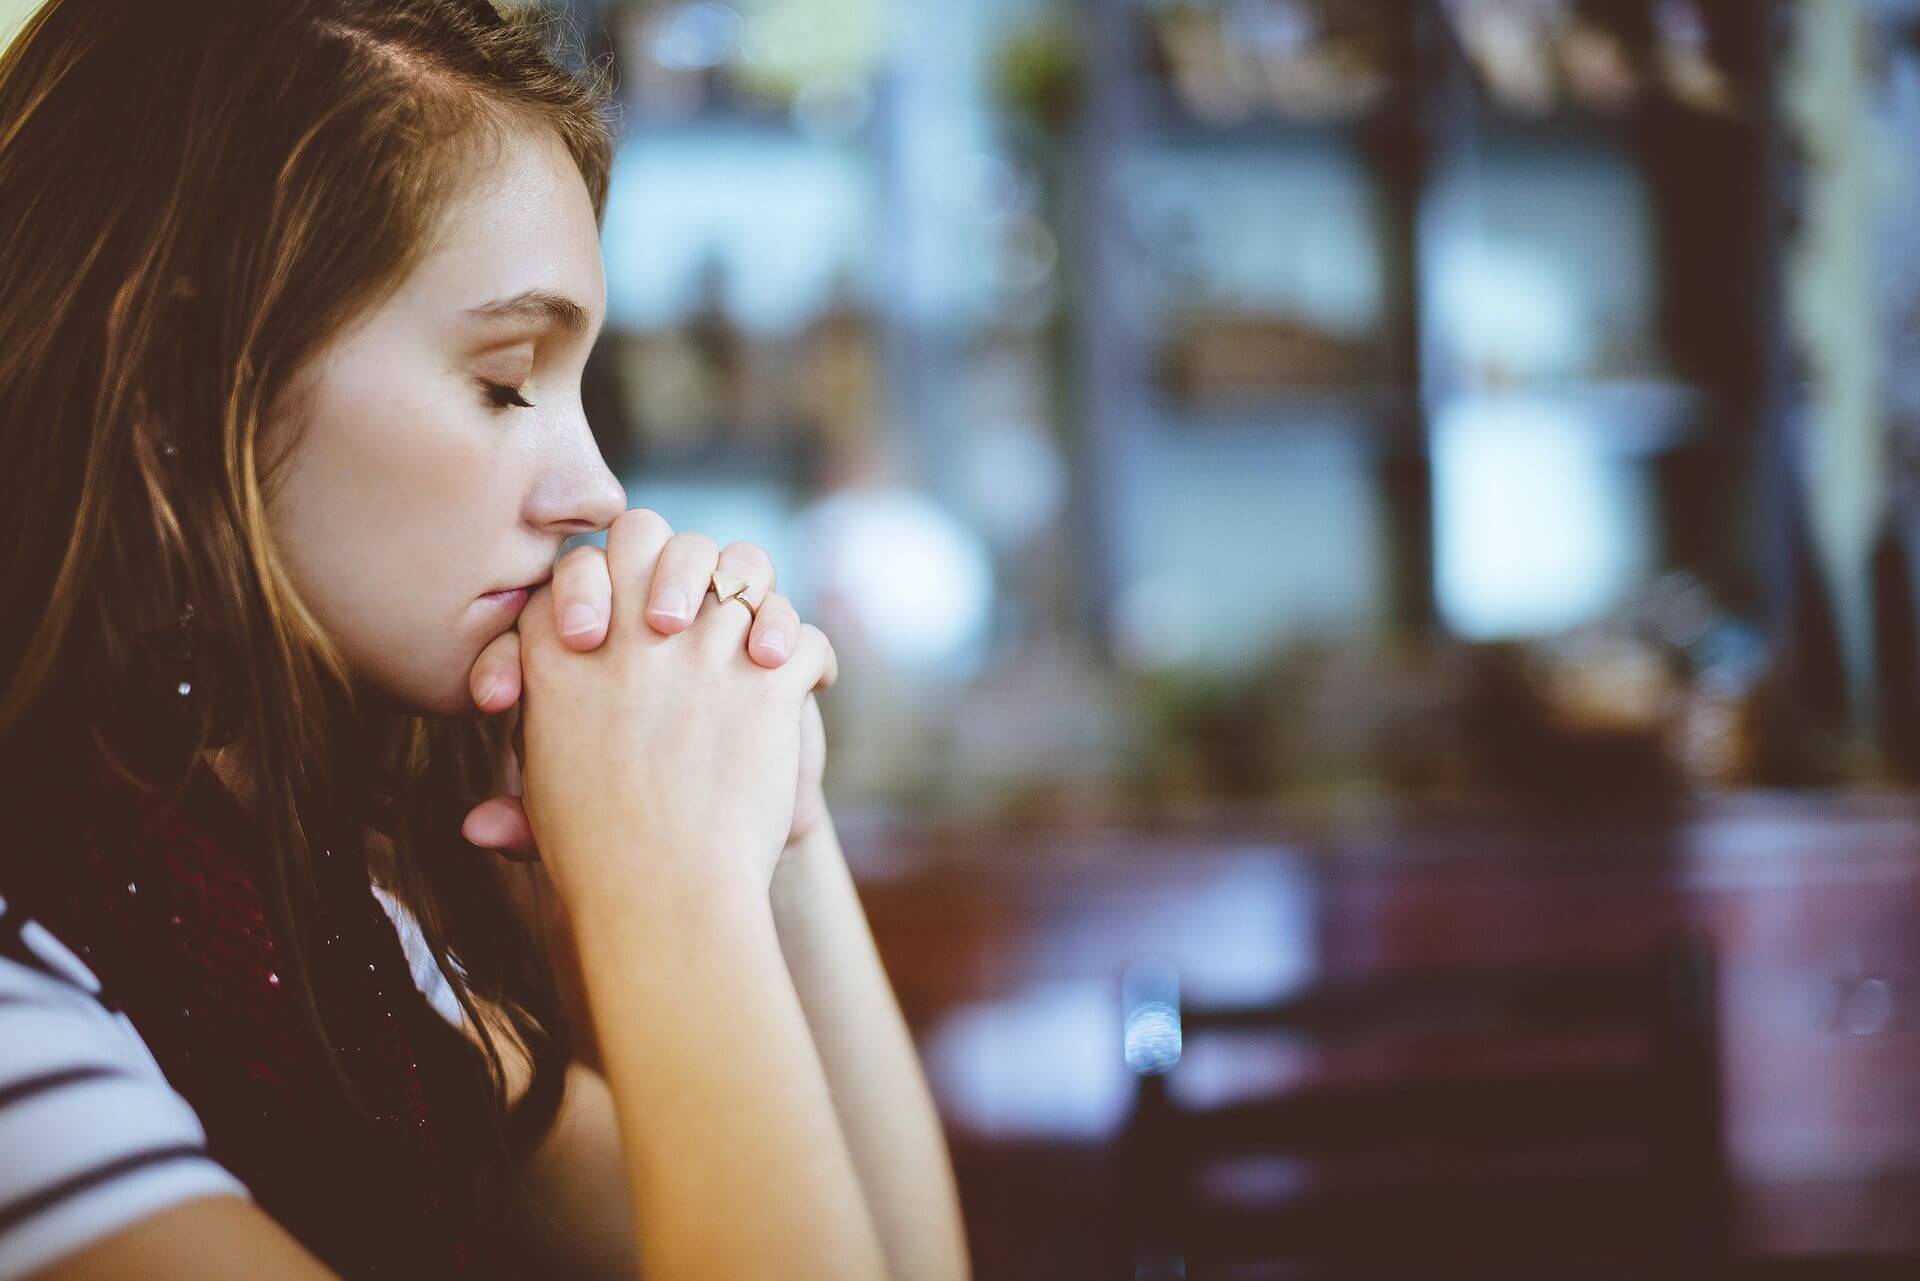 Young Woman With Her Hands Praying